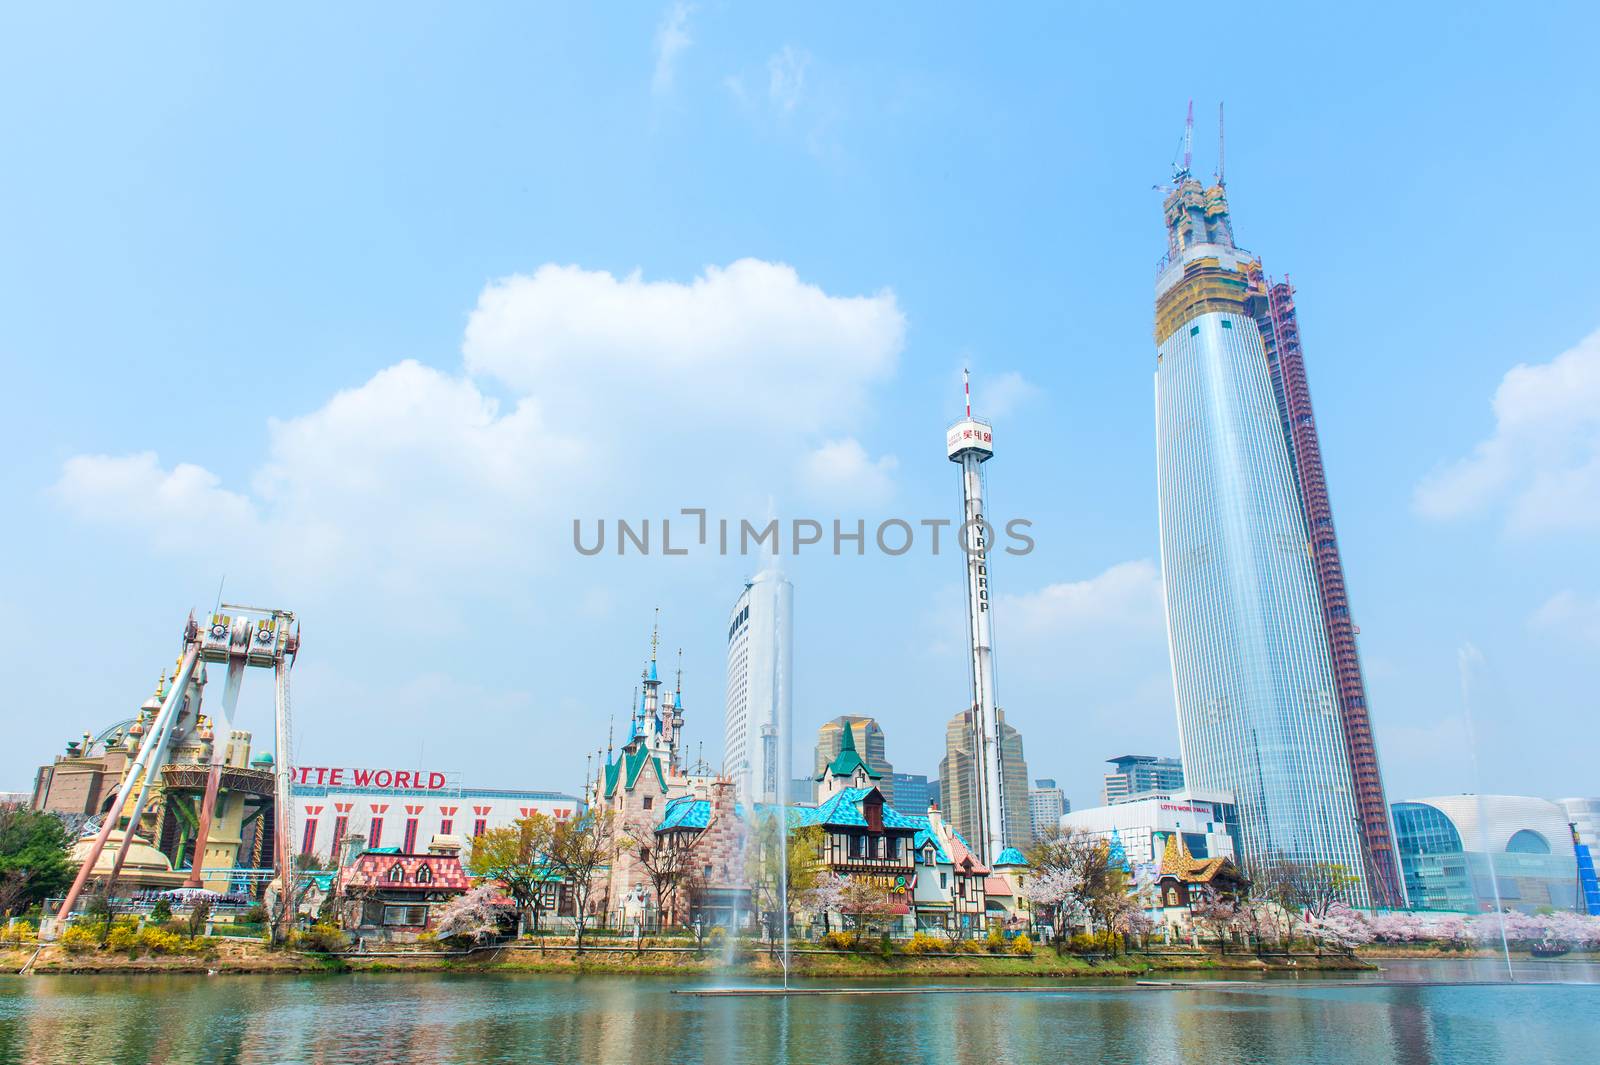 SEOUL, KOREA - APRIL 9, 2015: Lotte World amusement park and cherry blossom of Spring, a major tourist attraction in Seoul, South Korea on April 9, 2015